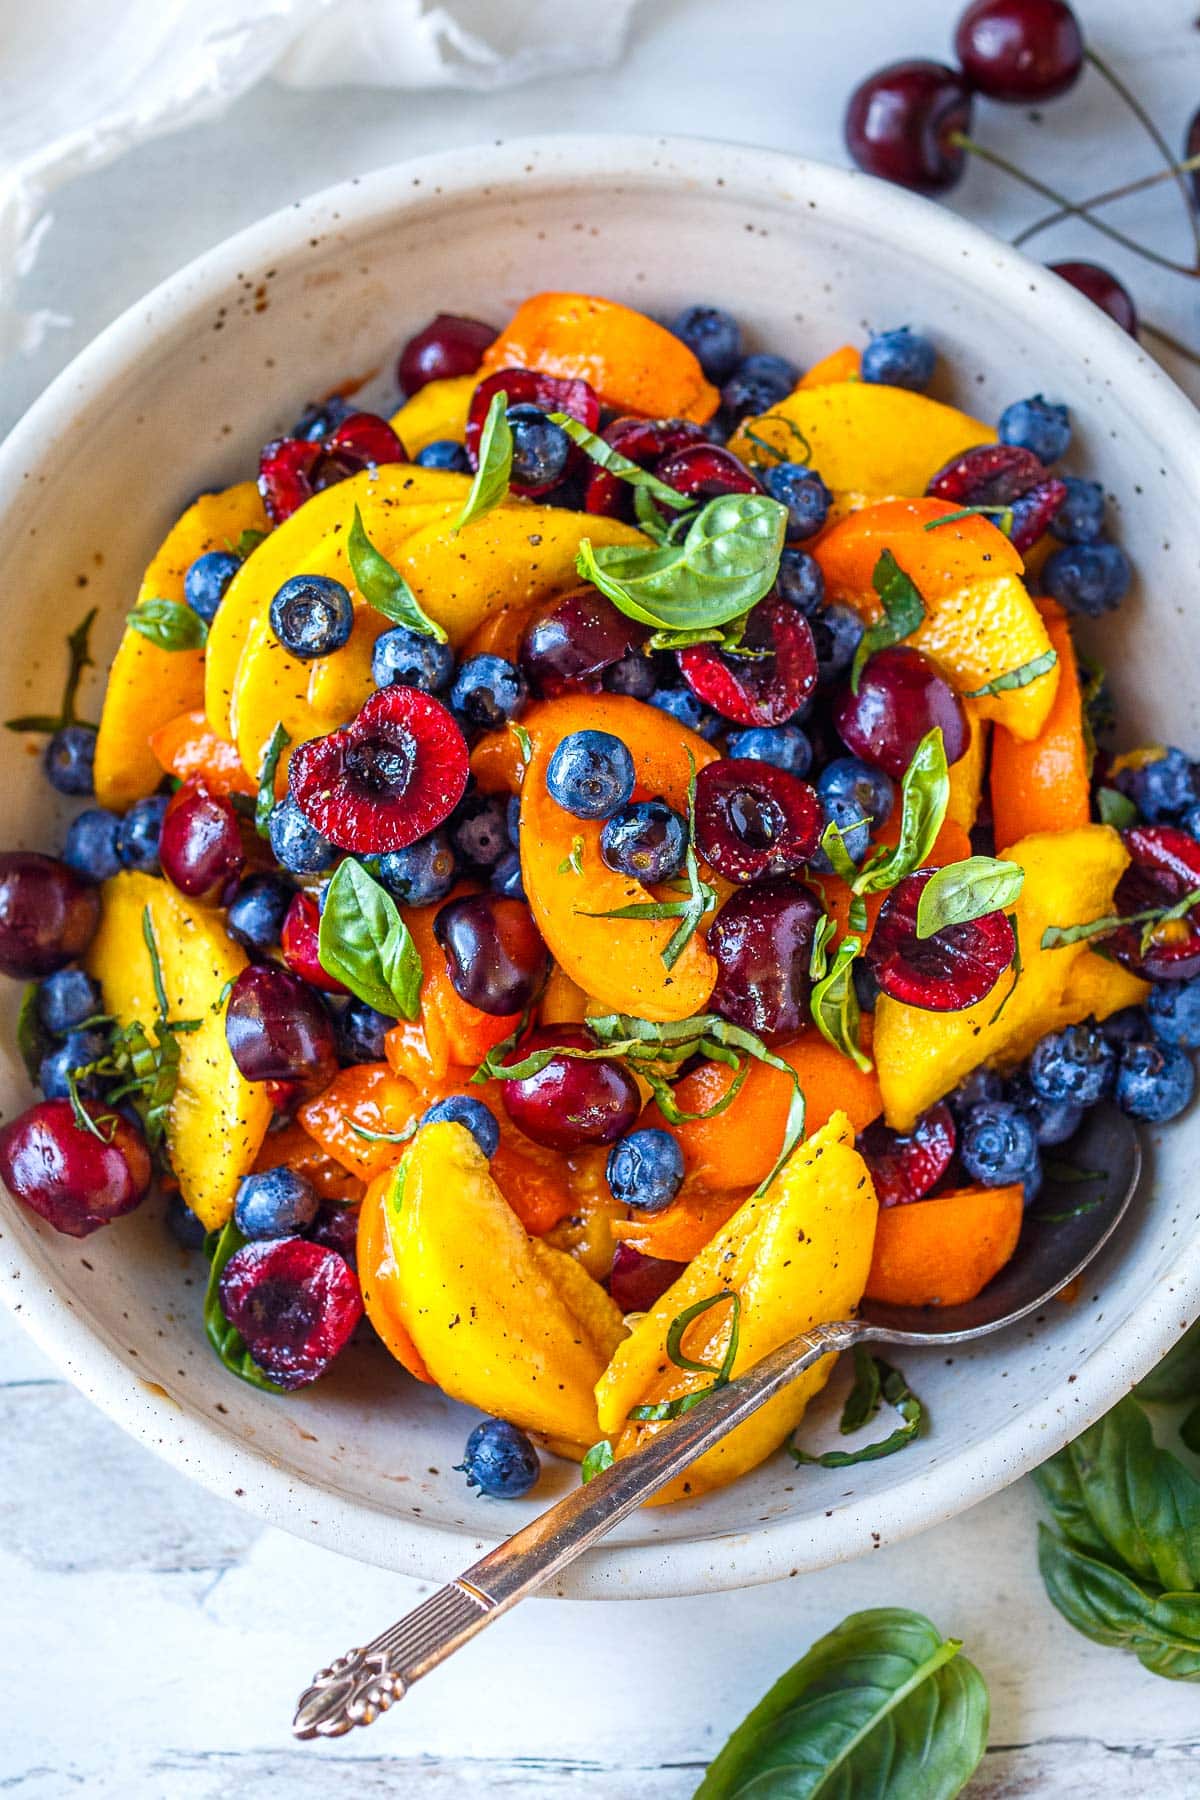 This luscious Fruit Salad is made with summer ripe stone fruit and berries. Cherries, peaches, and apricots along with blueberries and fresh basil- tossed in a delicious vanilla balsamic dressing.